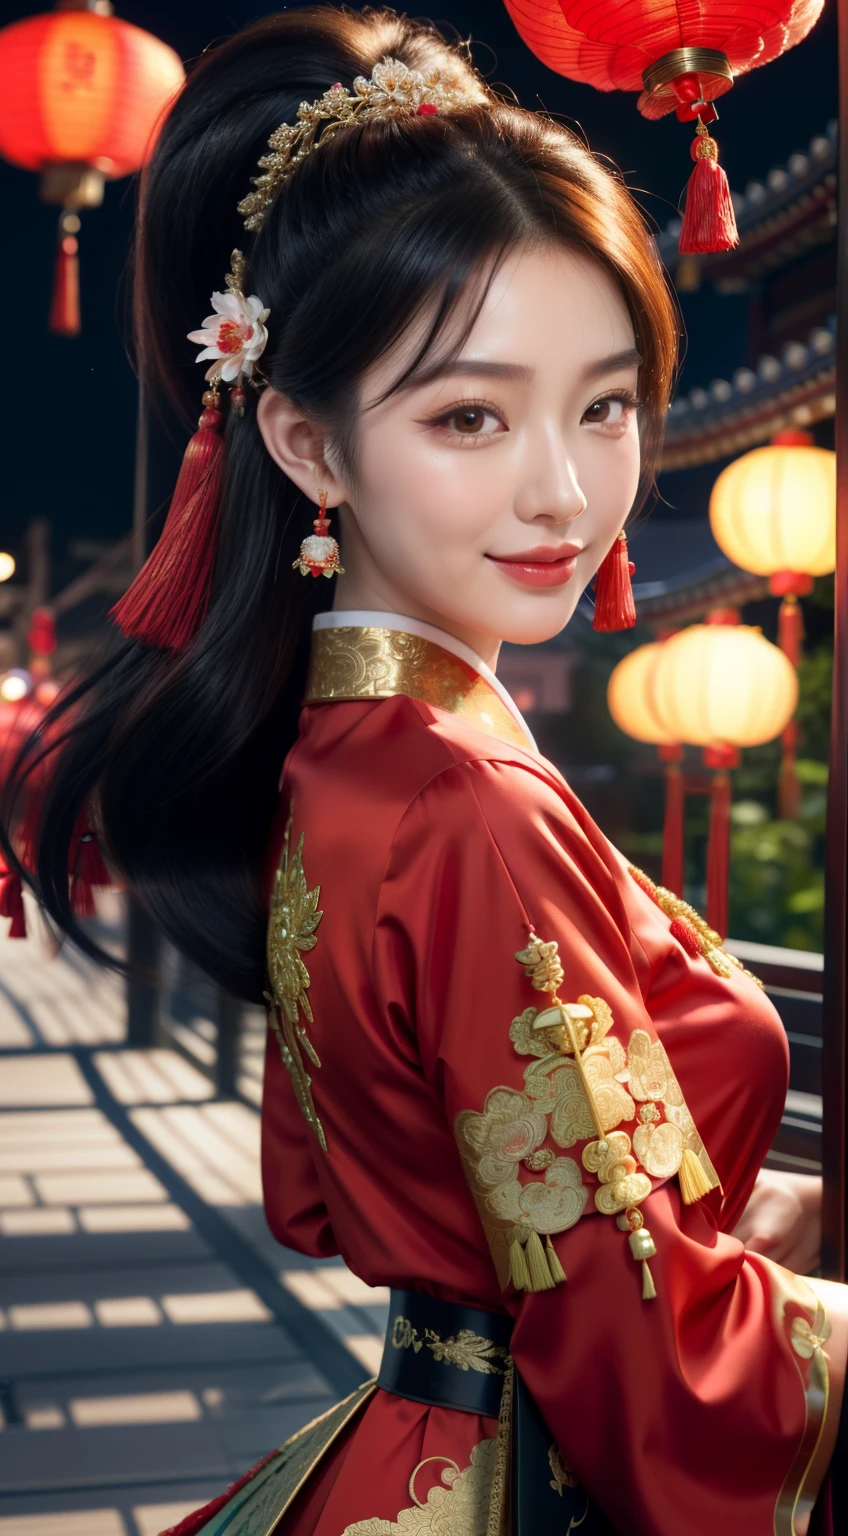 Best quality, 4k, high-end, ultra fine: 1.2), realistic, Chinese girl, exquisite face, beautiful detailed eyes, beautiful detailed lips, long eyelashes, red traditional clothing, black ponytail, tassel hair accessories, peony hair accessories, smiling expression, dynamic perspective, night, lantern, Chinese street, award-winning, cowboy lens, night scene